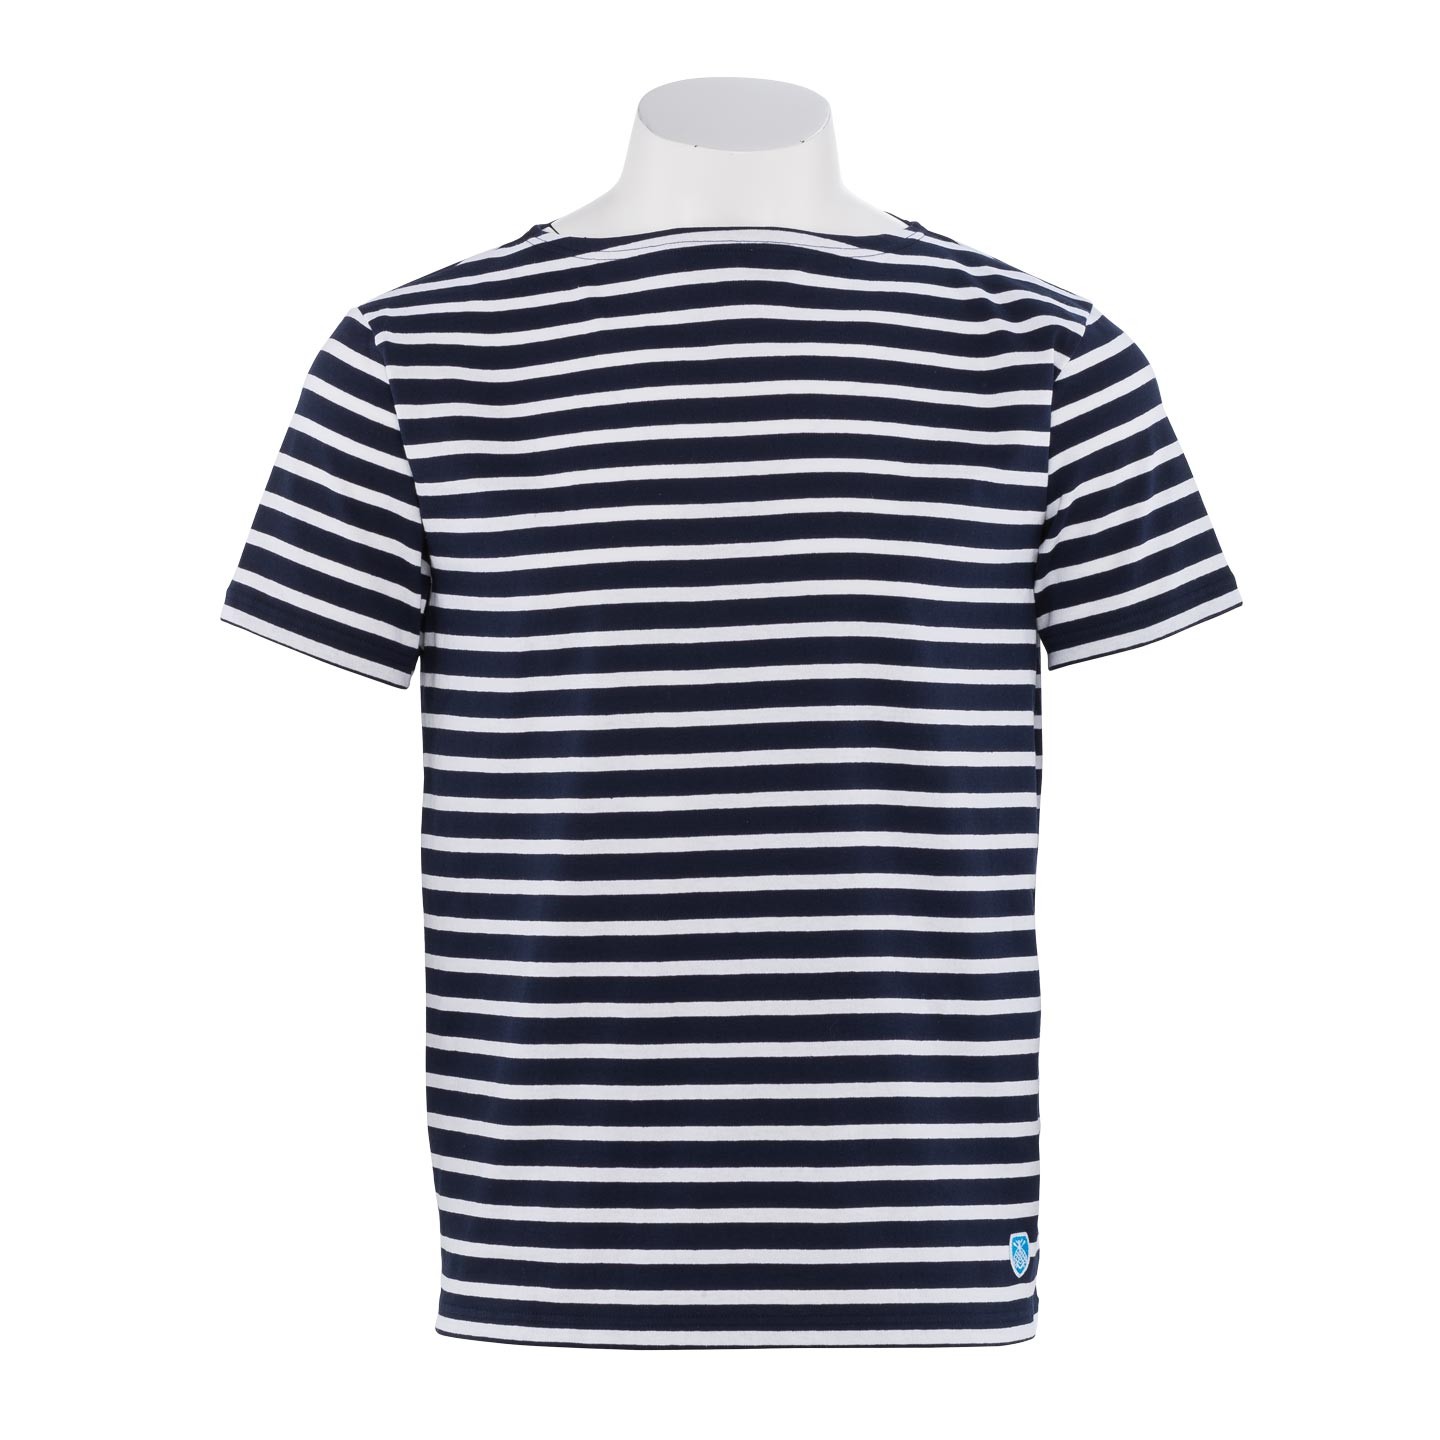 Short striped shirt Navy / White, unisex made in France Orcival